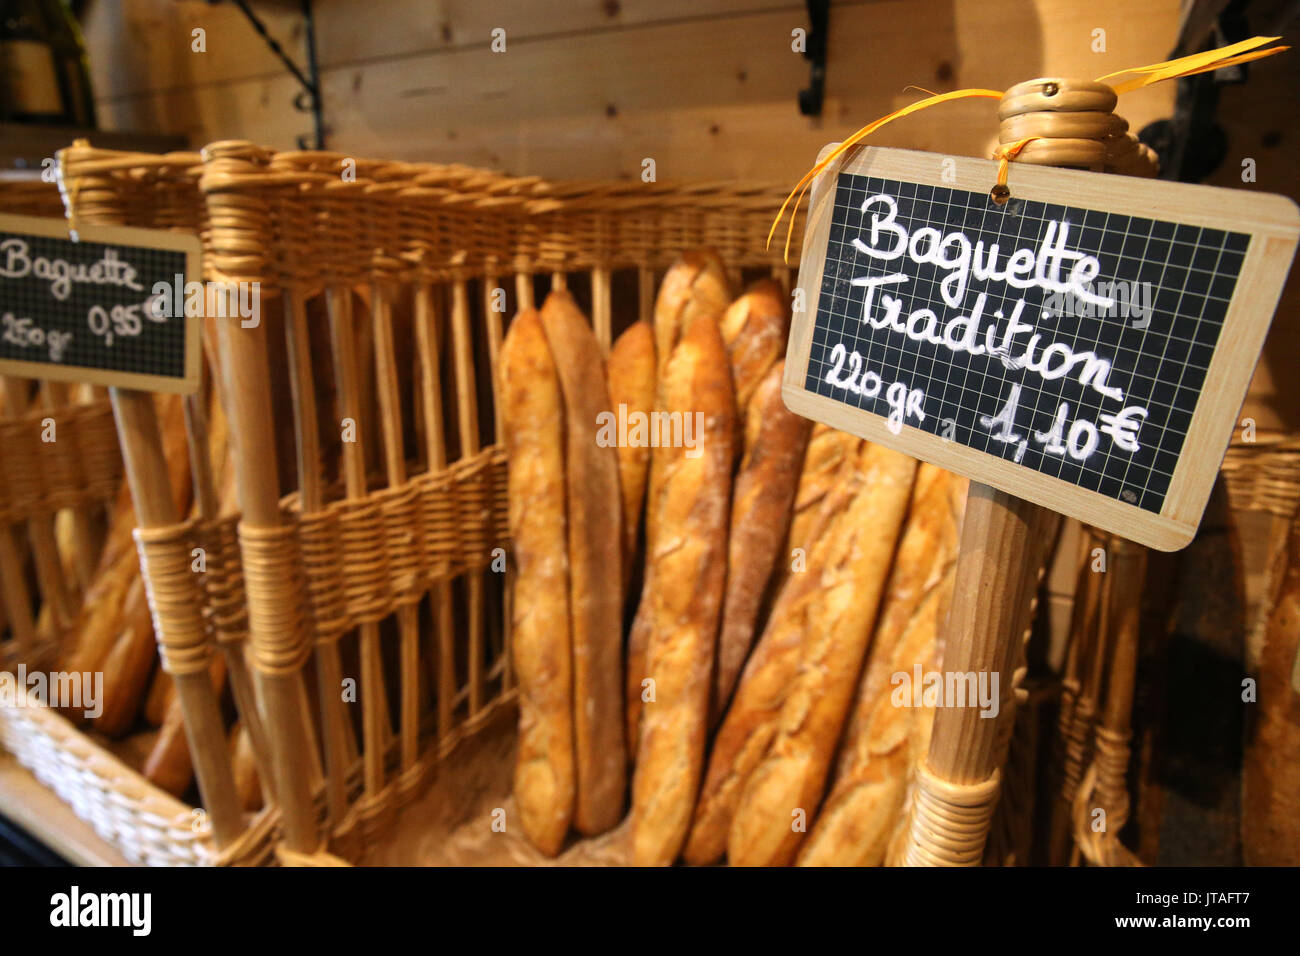 Bakery, French baguettes, Haute-Savoie, France, Europe Stock Photo